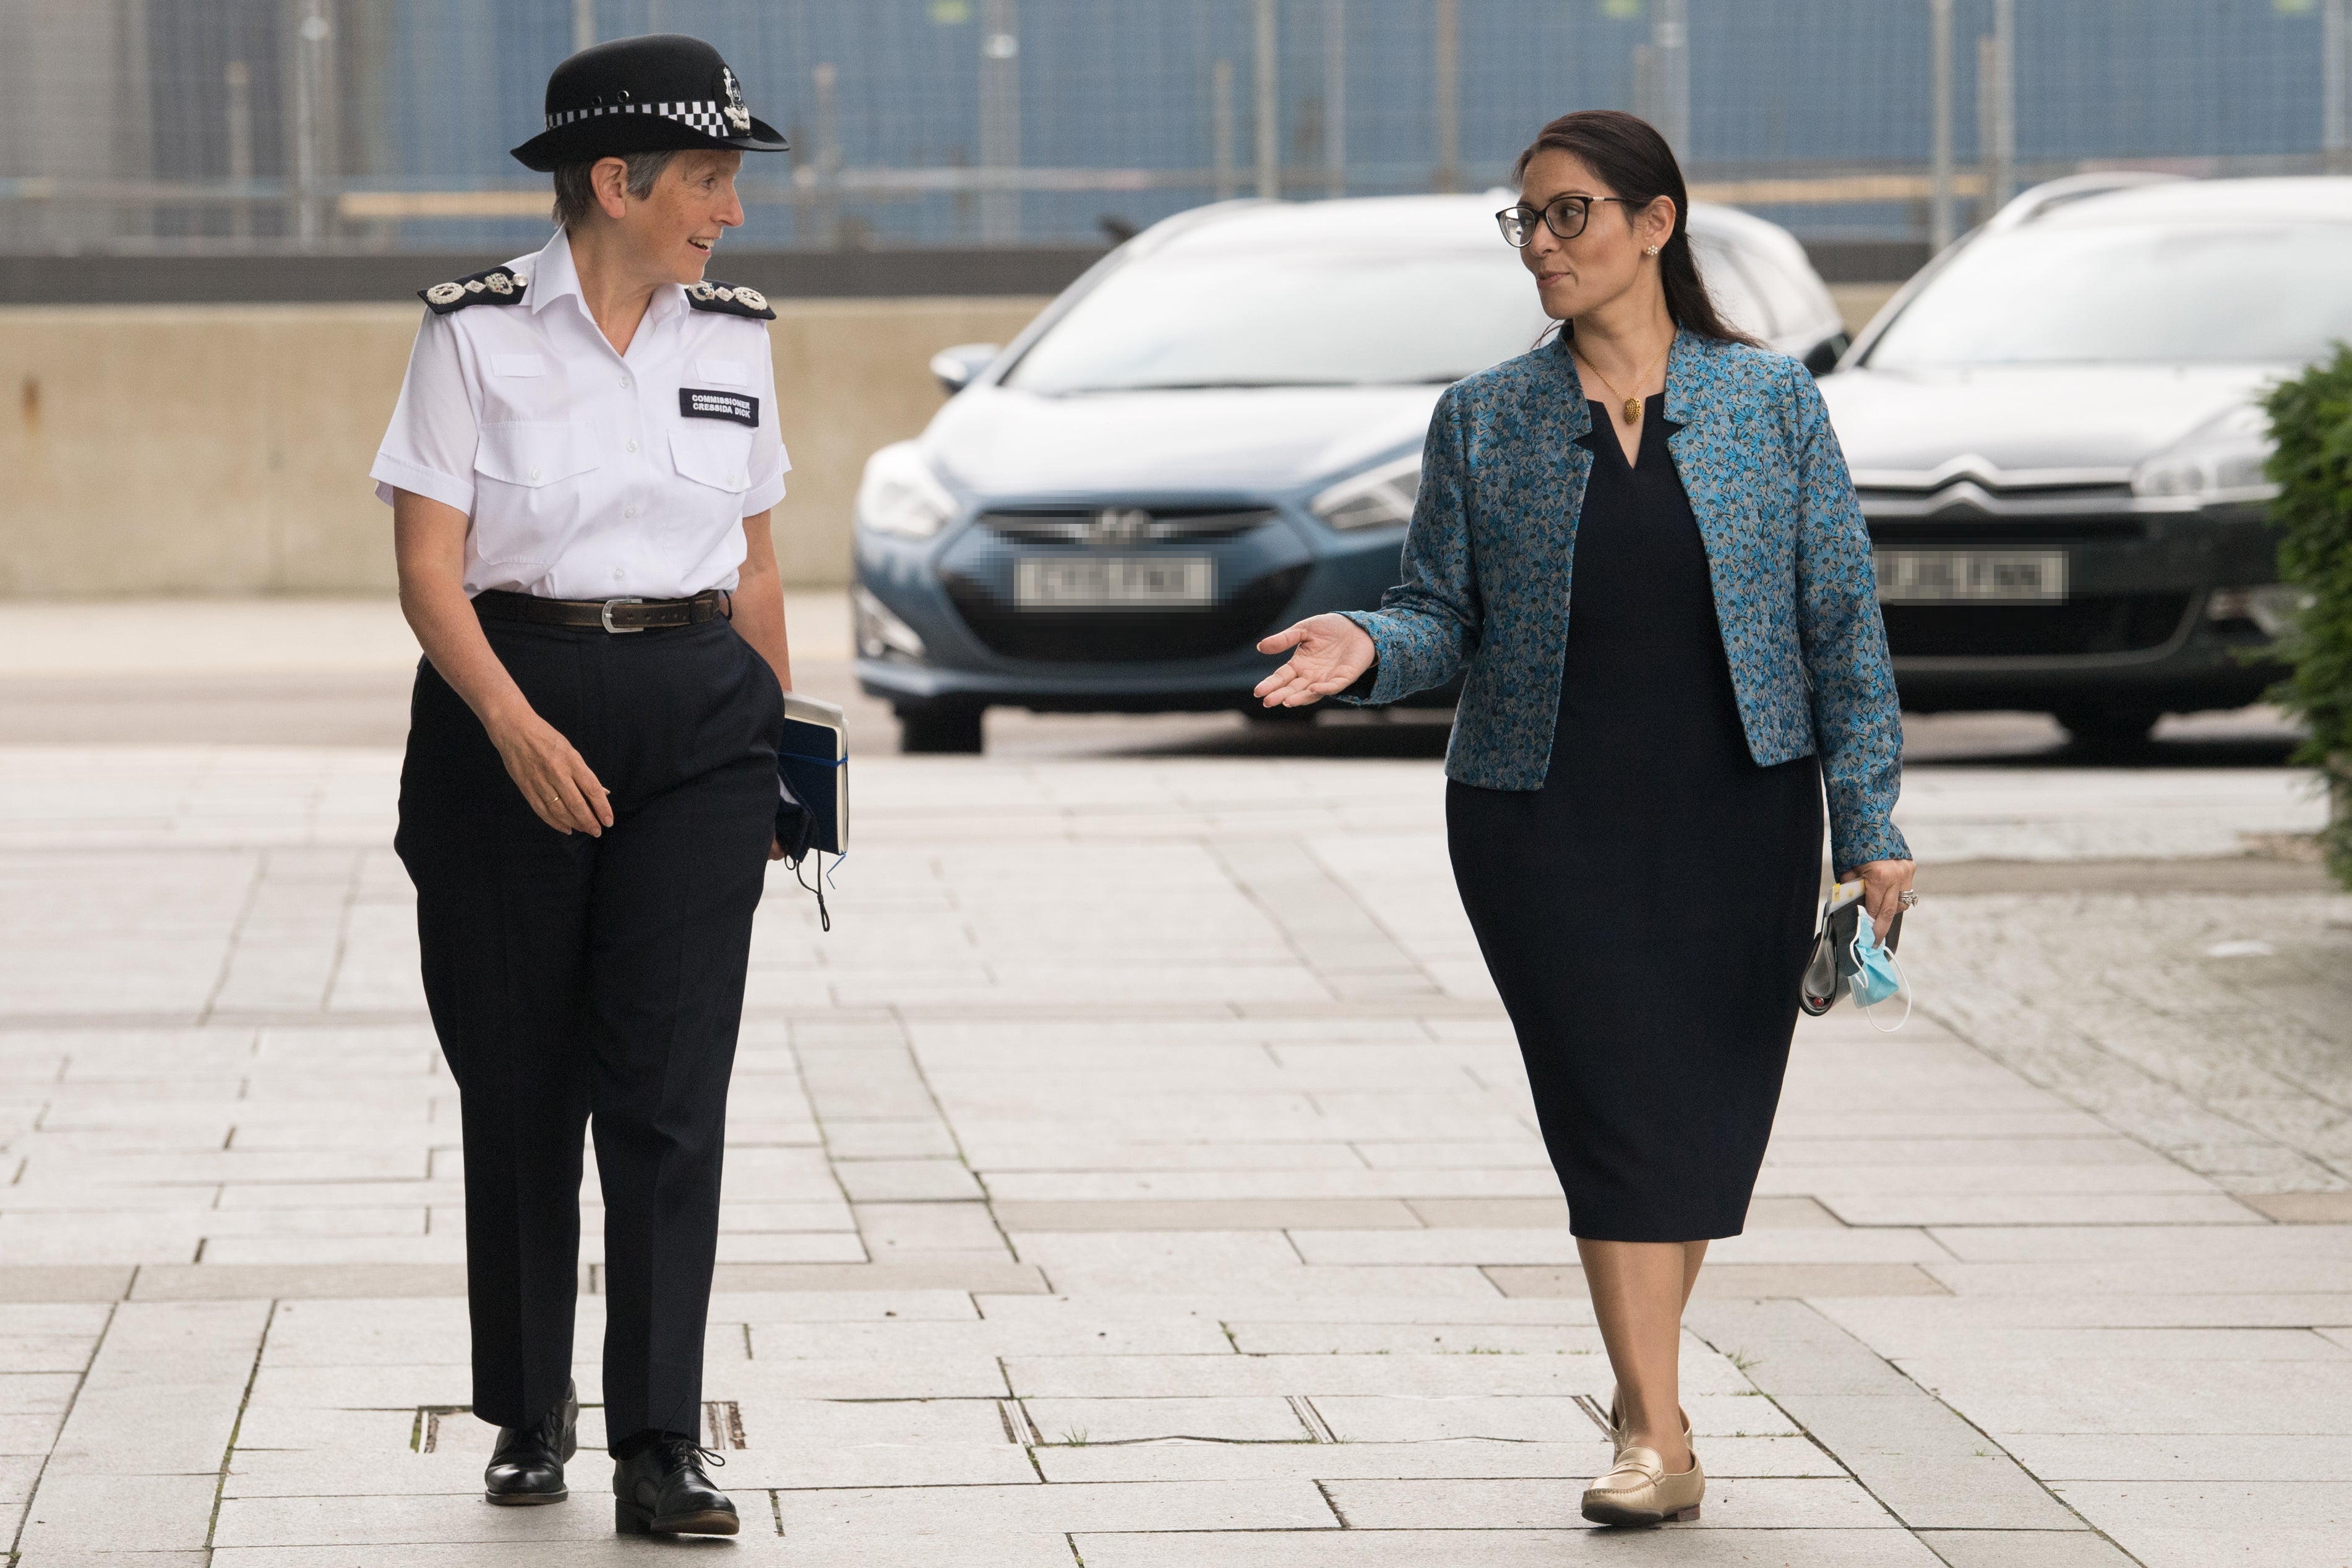 Home Secretary Priti Patel confirmed Dame Cressida would continue her role for a further two years (Stefan Rousseau/PA)